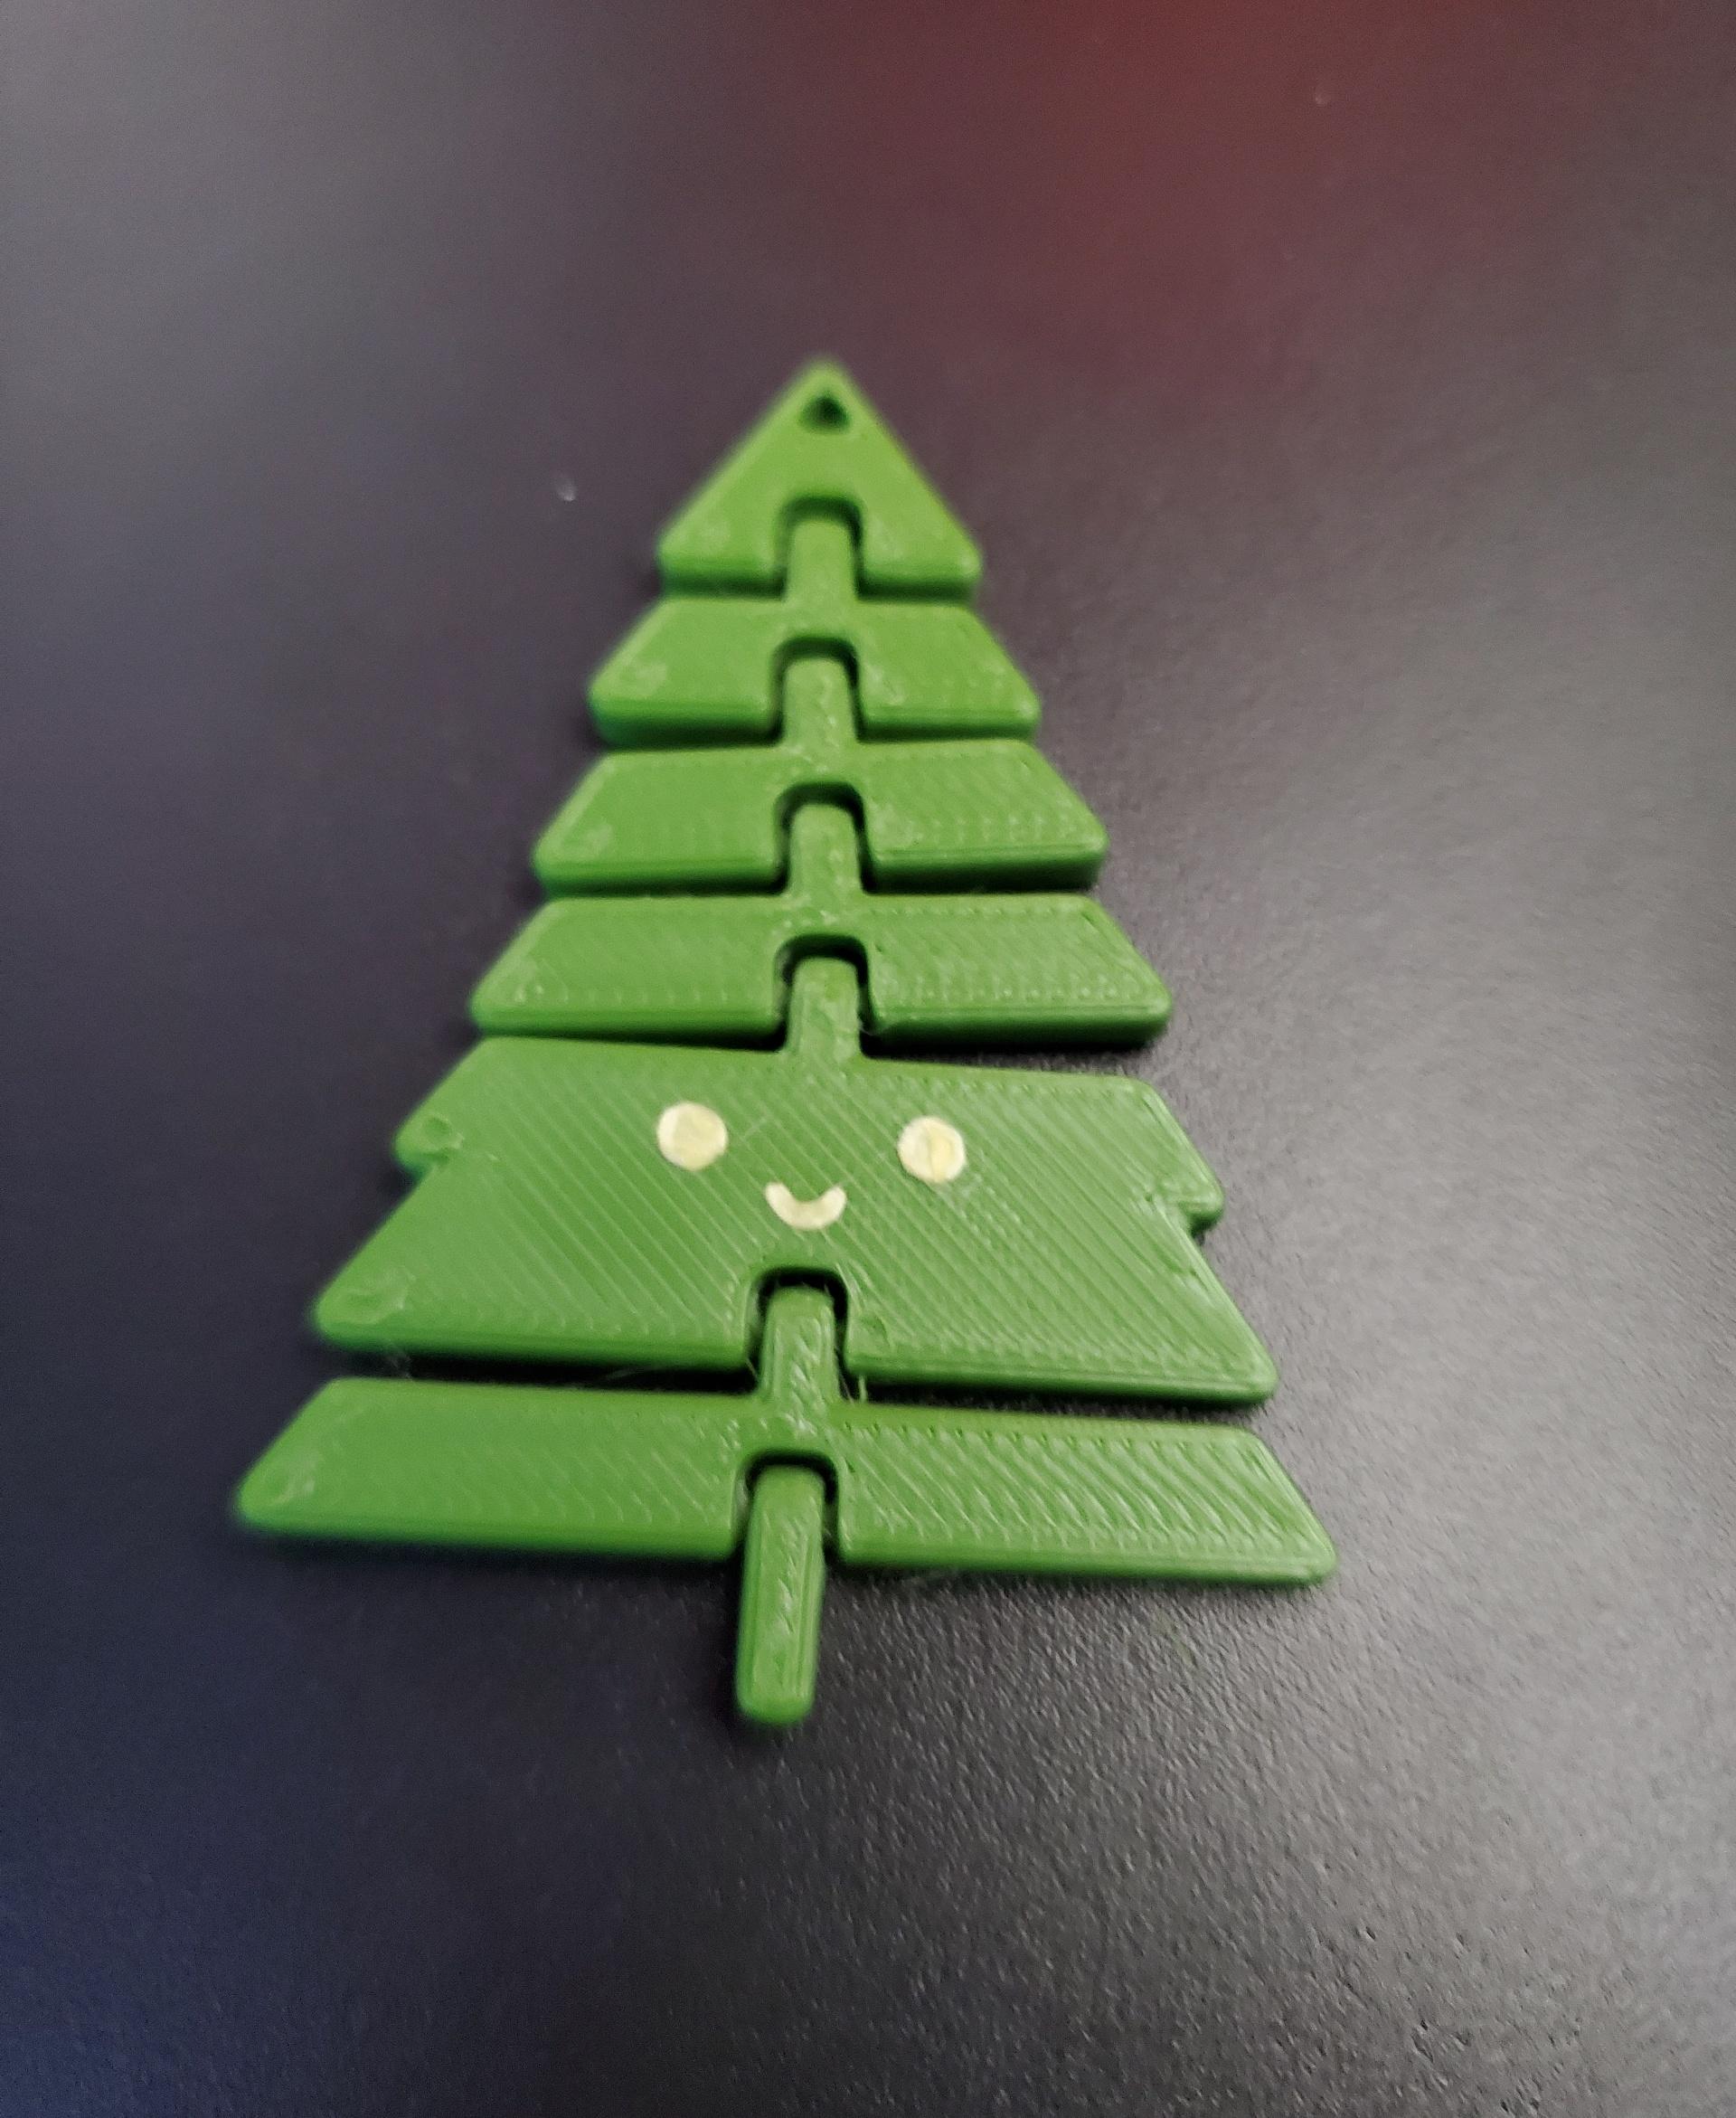 Articulated Kawaii Christmas Tree Keychain - Print in place fidget toy - 3mf - polymaker jungle green - 3d model